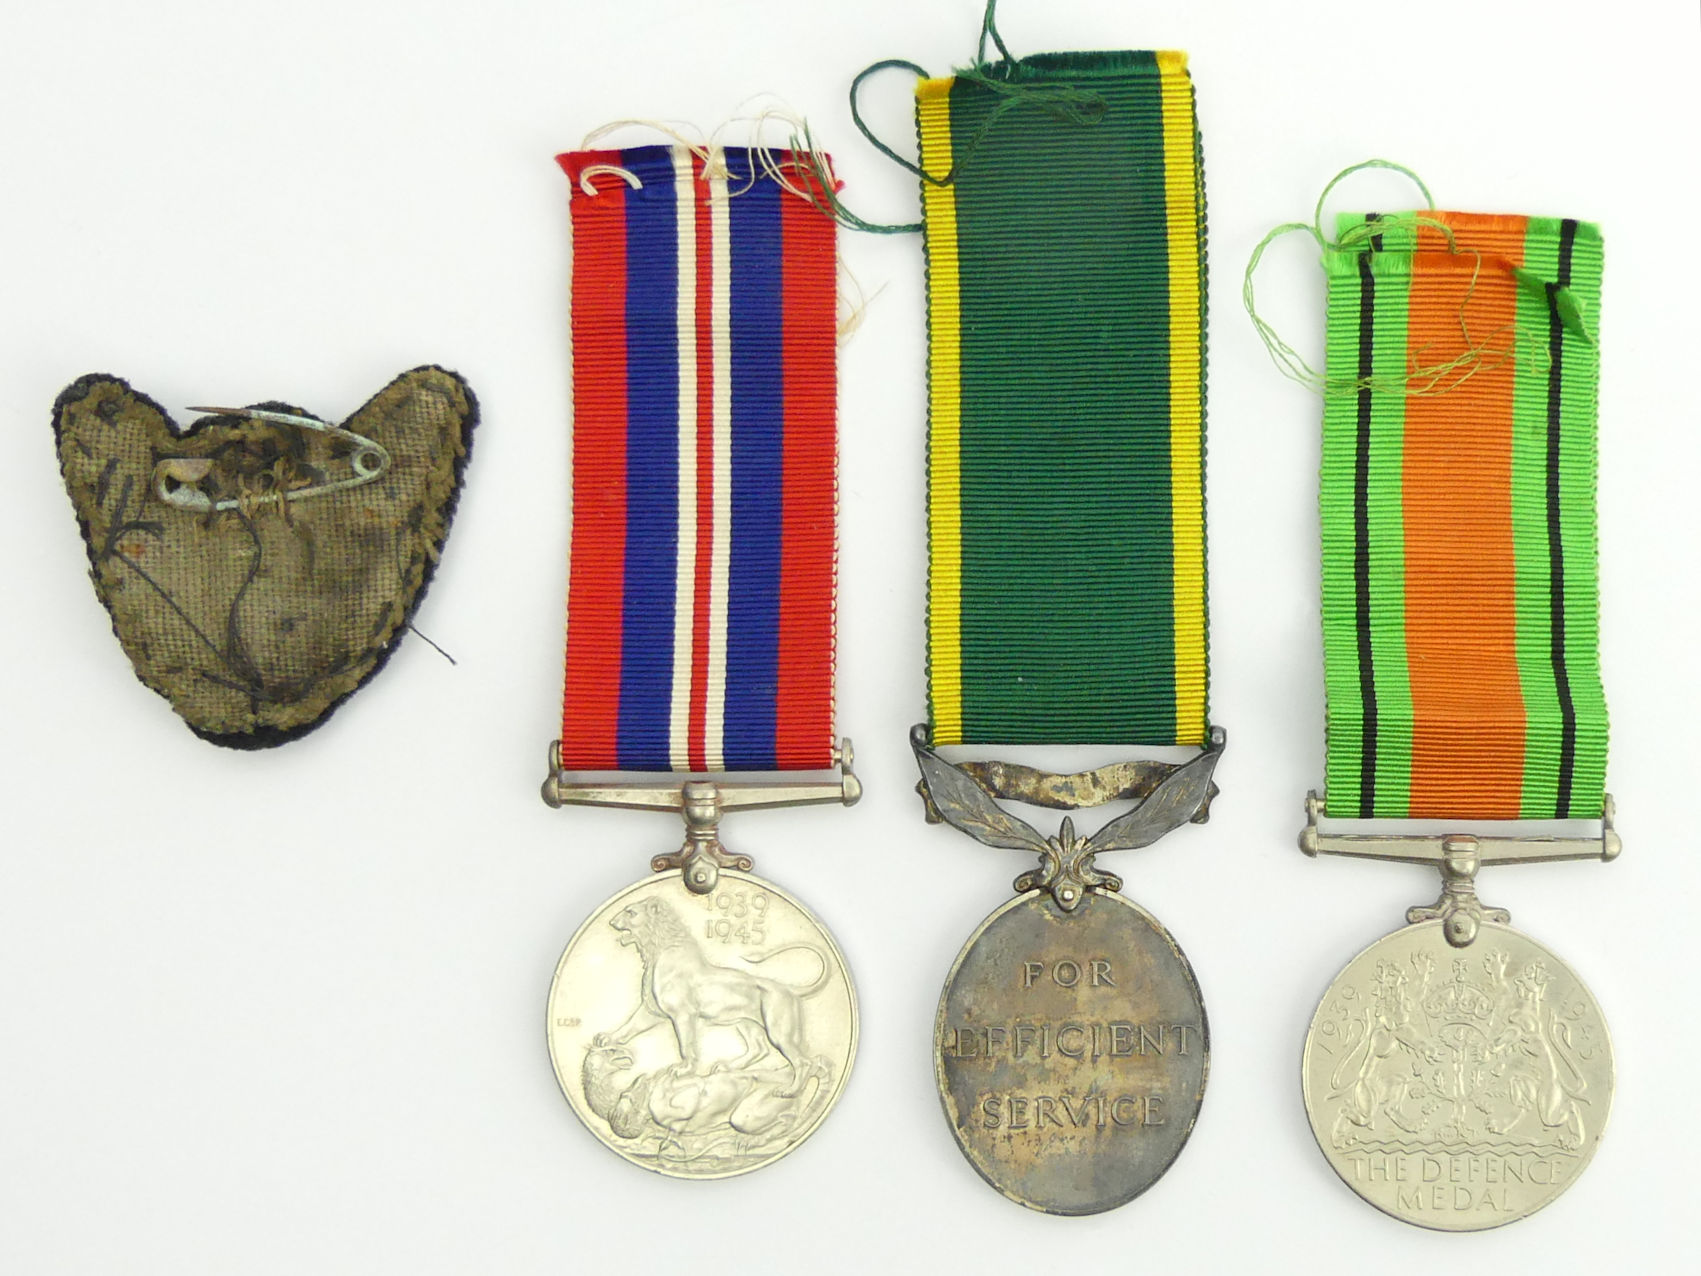 World War II medal group including Territorial for Efficient Service and a cloth badge, issued to - Image 2 of 5